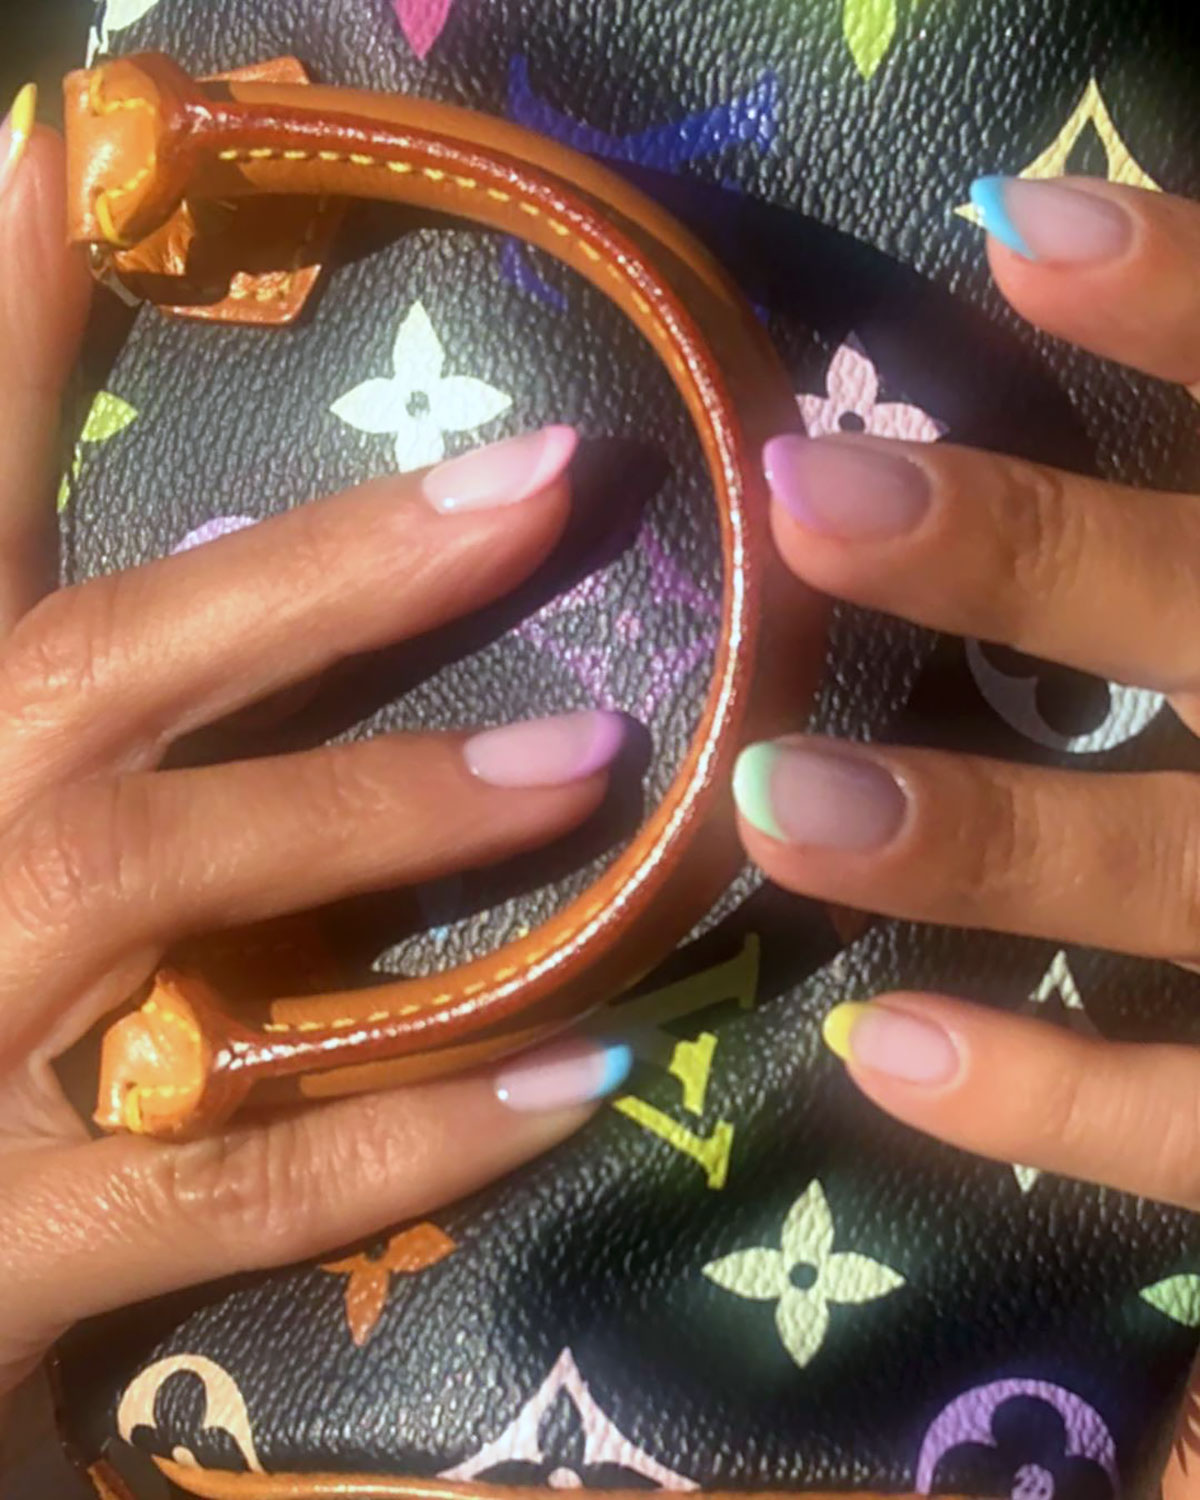 Kylie Jenner and More Celeb Nail Art Trend Inspiration, Summer 2020